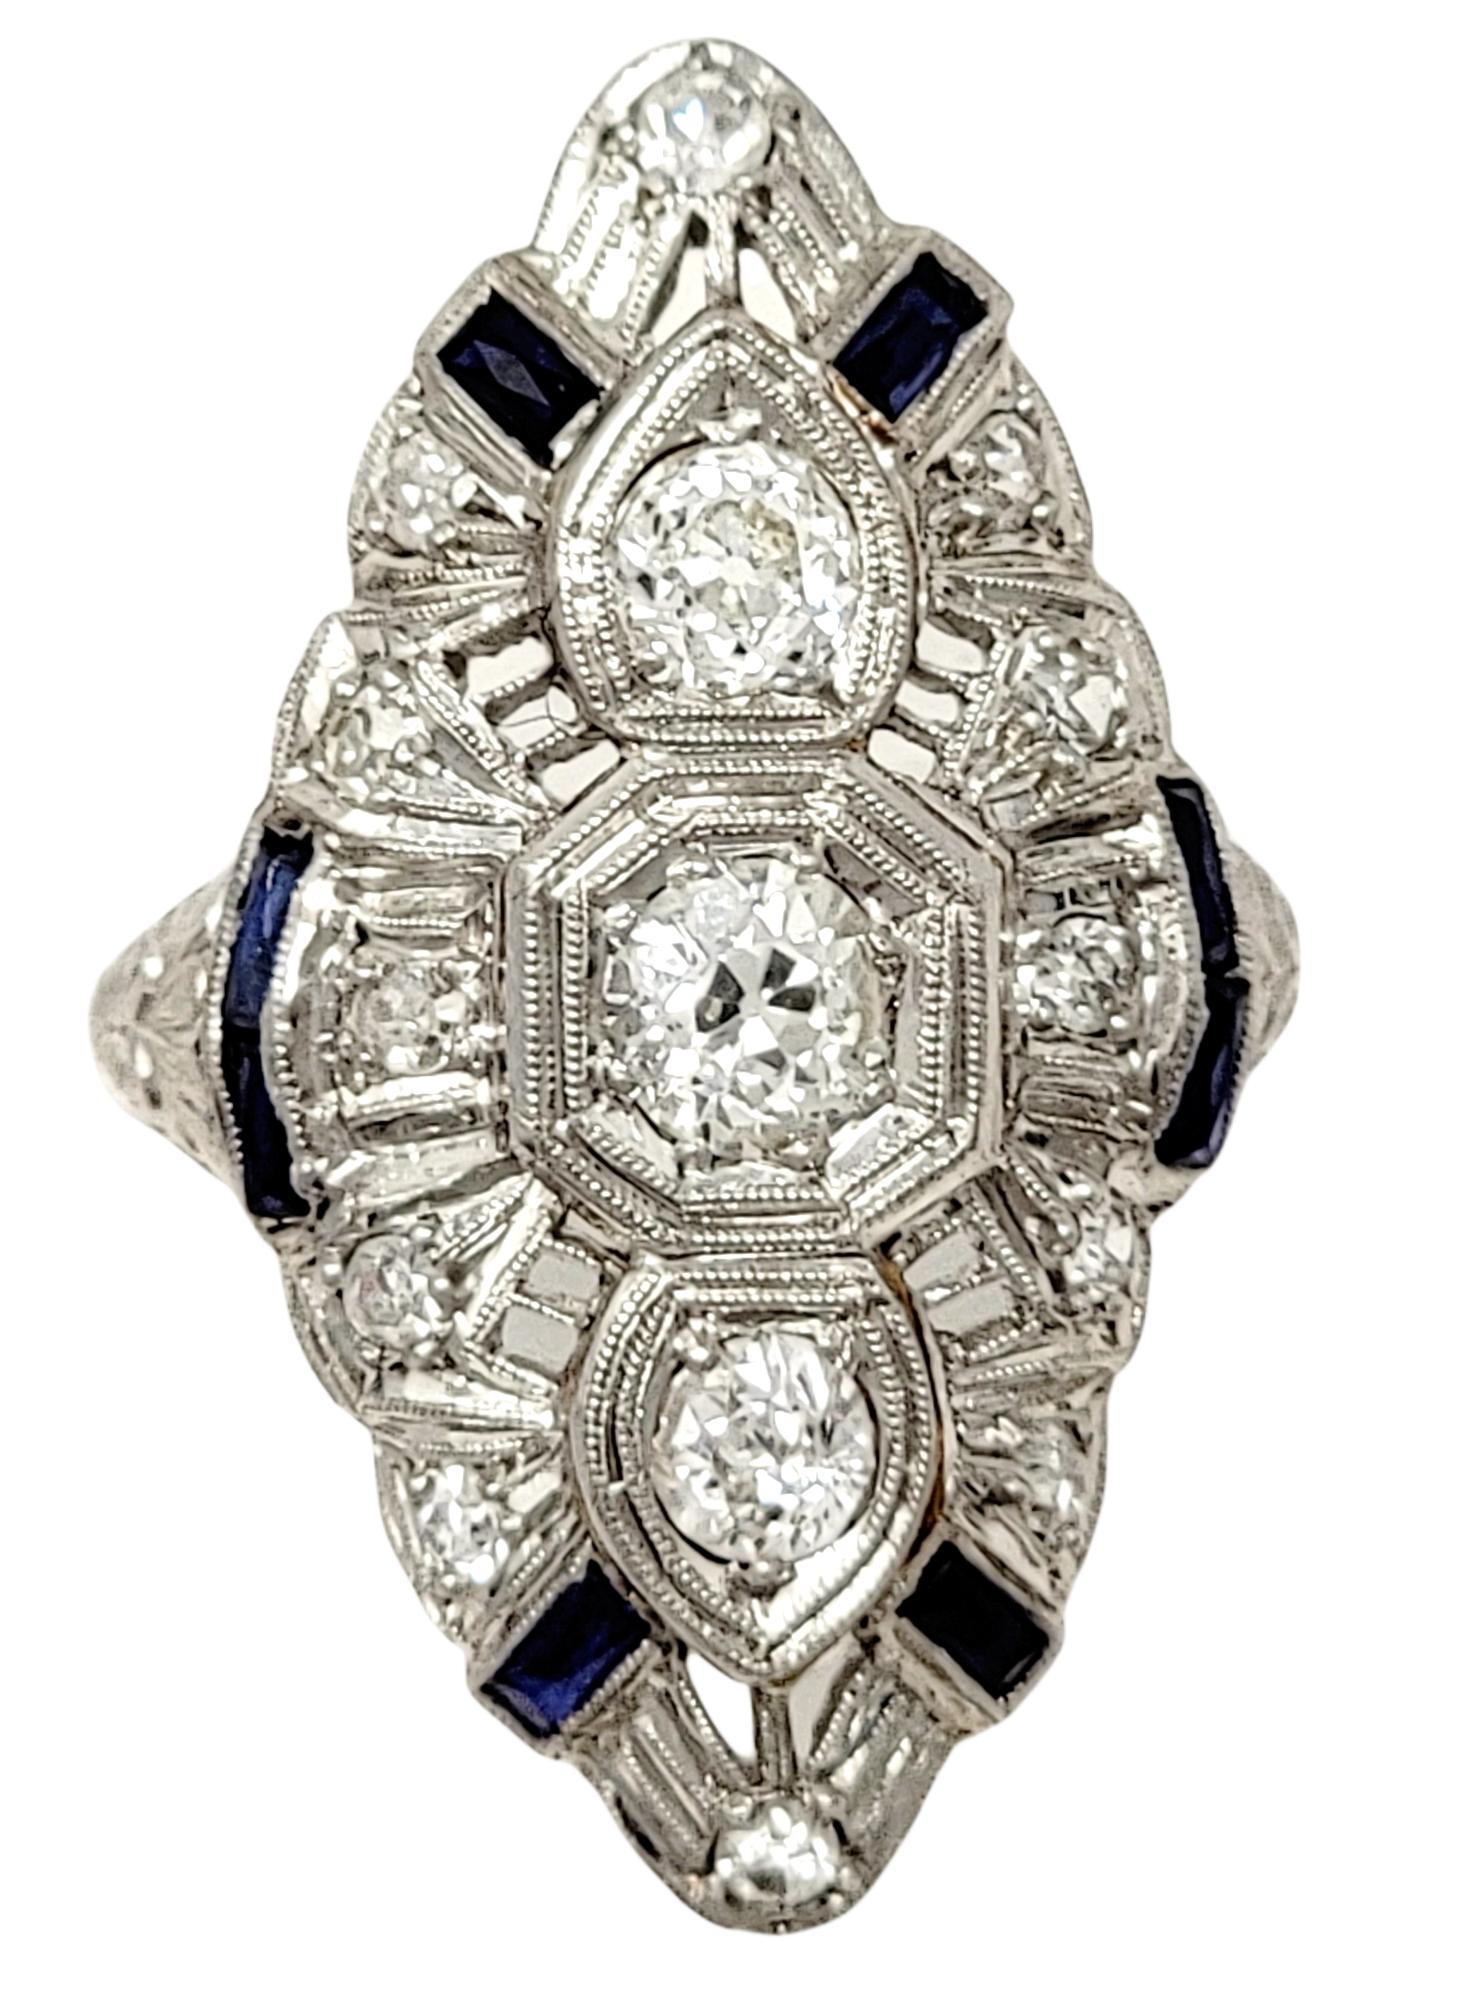 Ring size: 5.25

Incredible vintage diamond and sapphire ring filled with Old World glamour. This gorgeous piece features 3 Old European cut diamonds set in an elongated row at the center of the piece. Additional accent diamonds are scattered